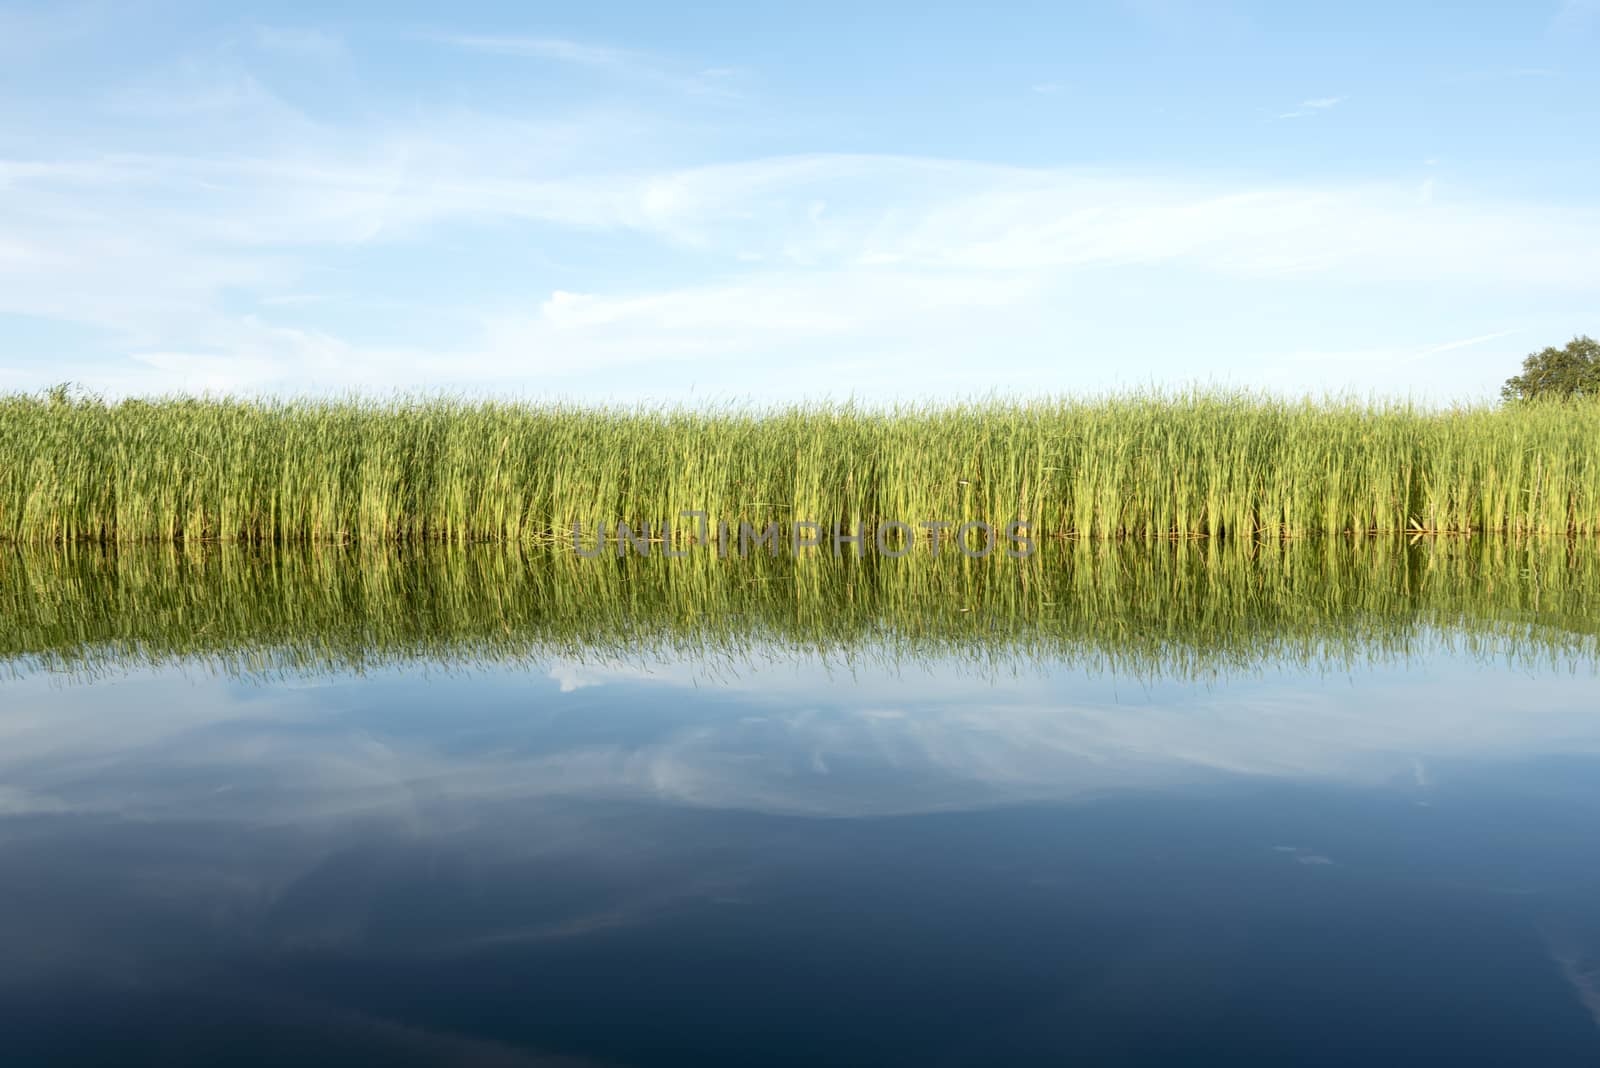 green grass with blue water in the lake and summer sky above